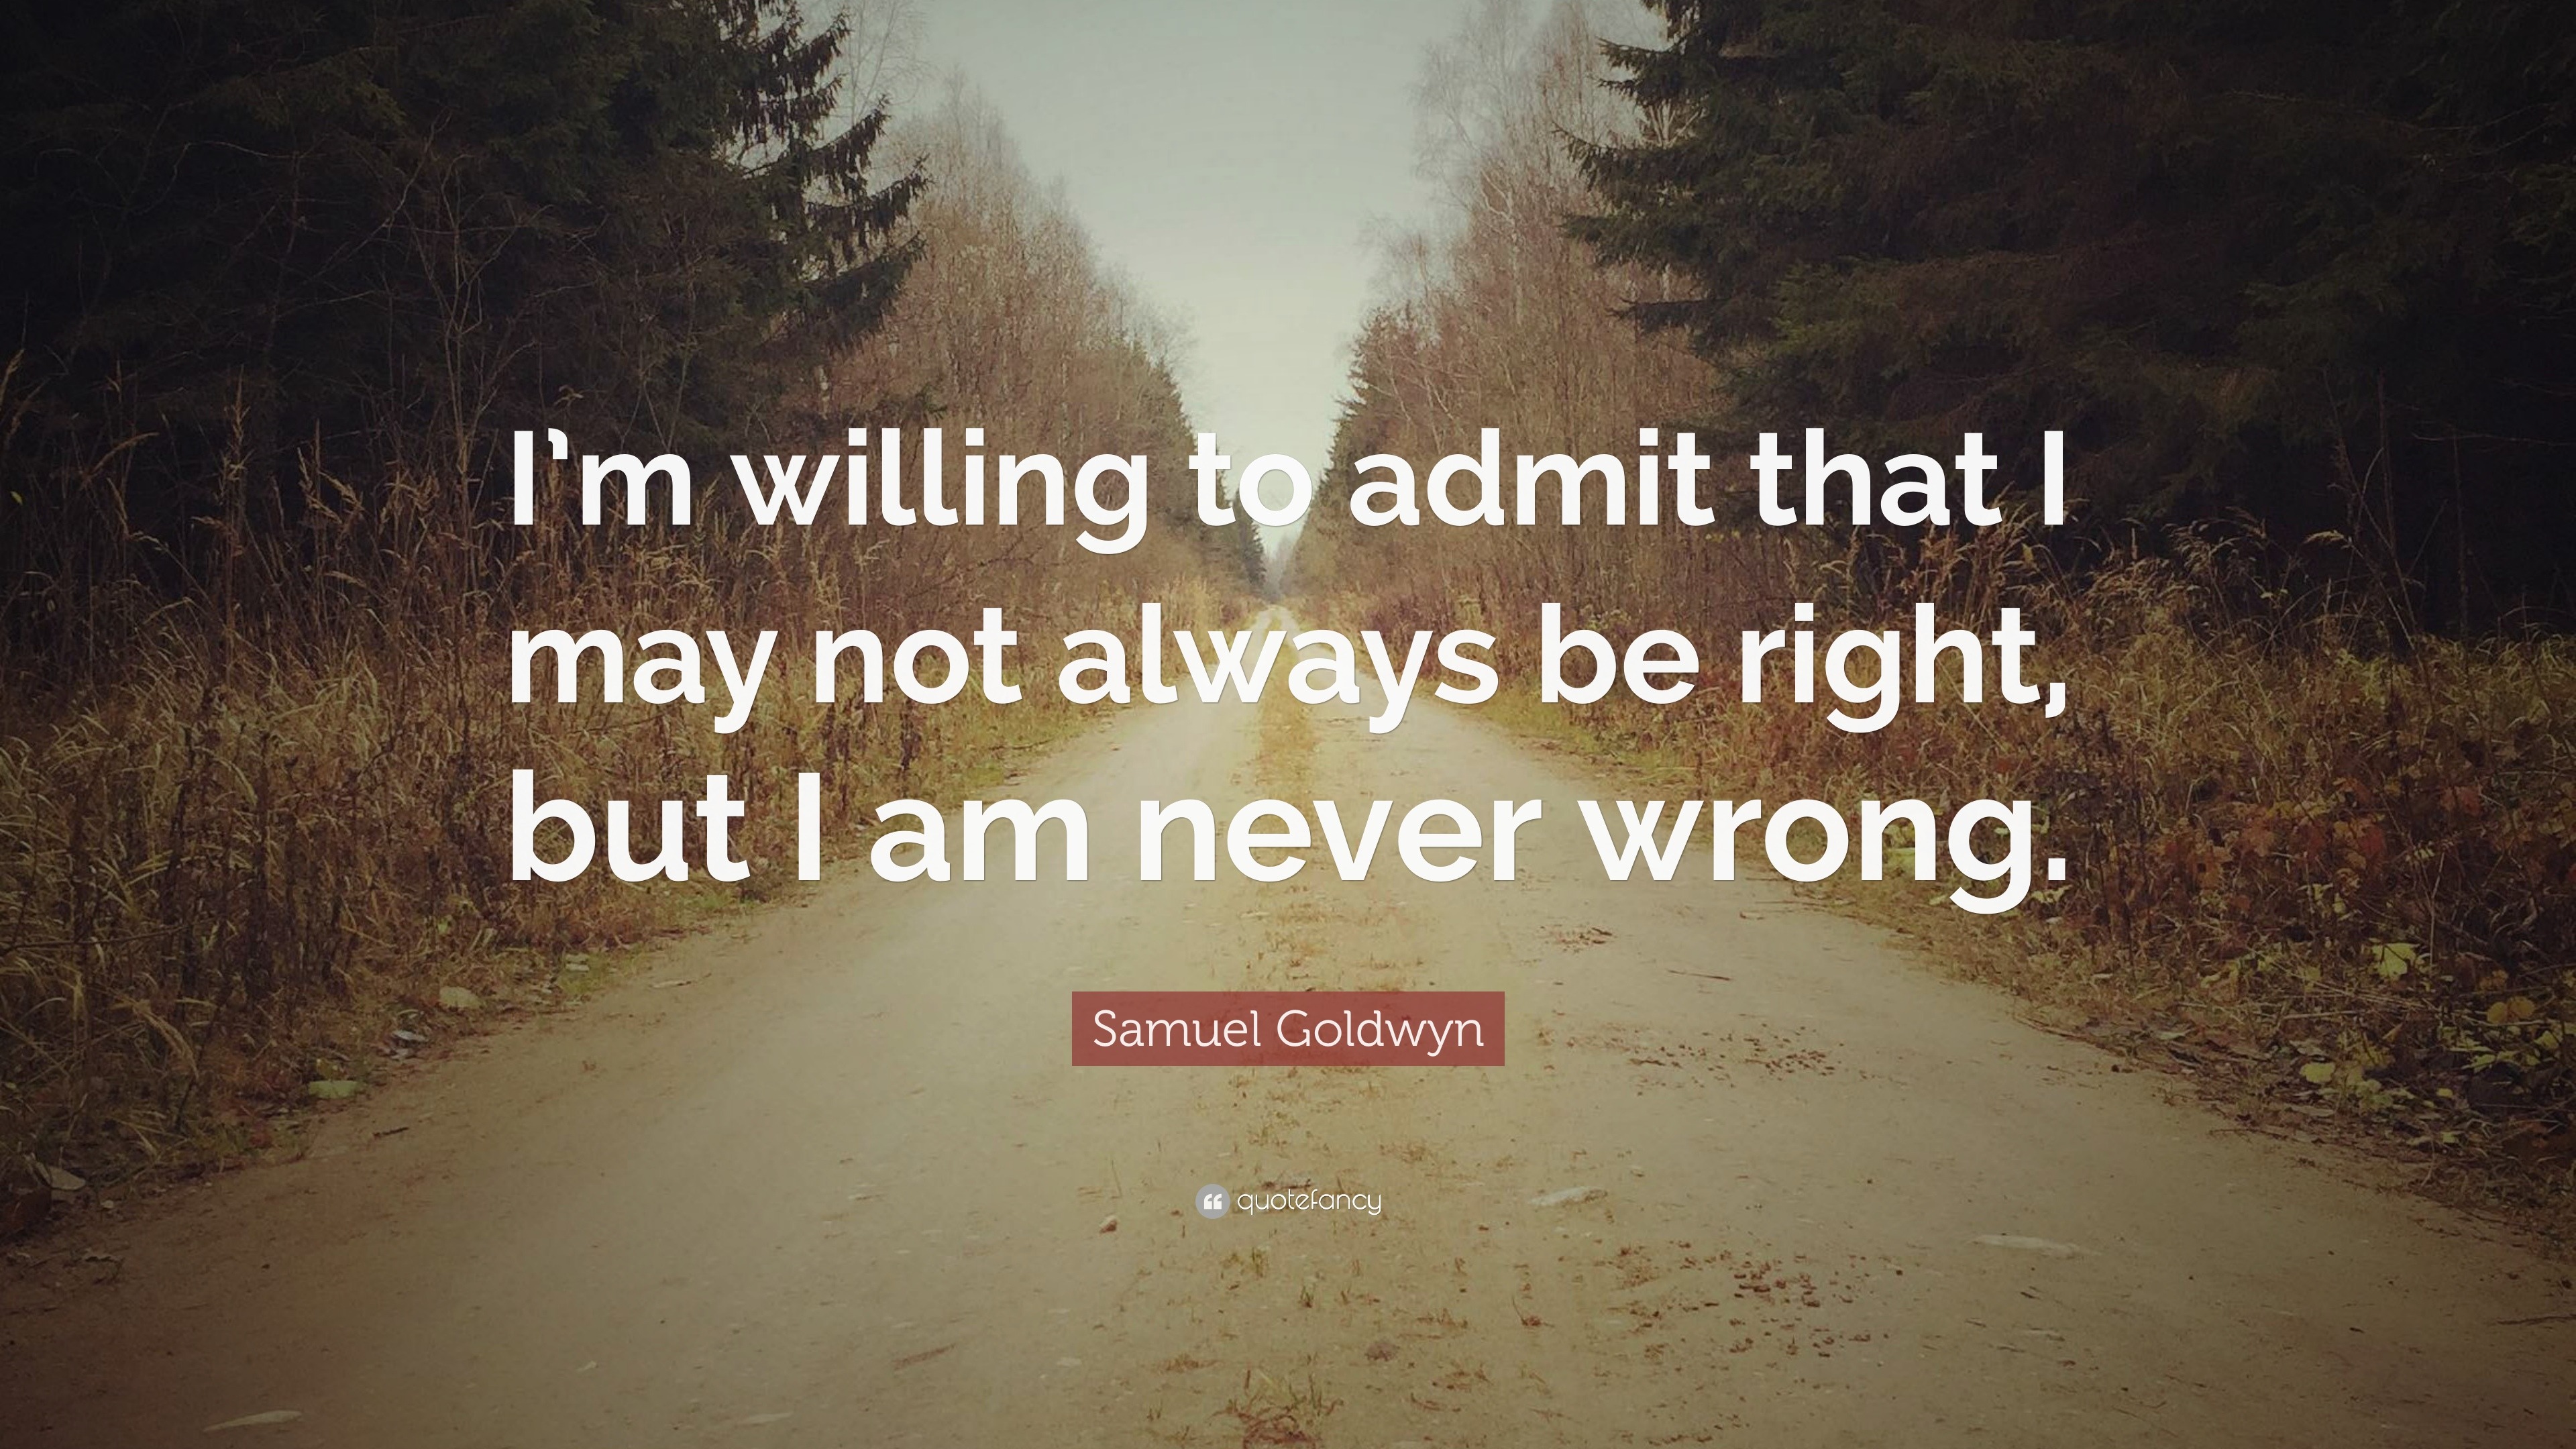 Samuel Goldwyn Quote “I’m willing to admit that I may not always be